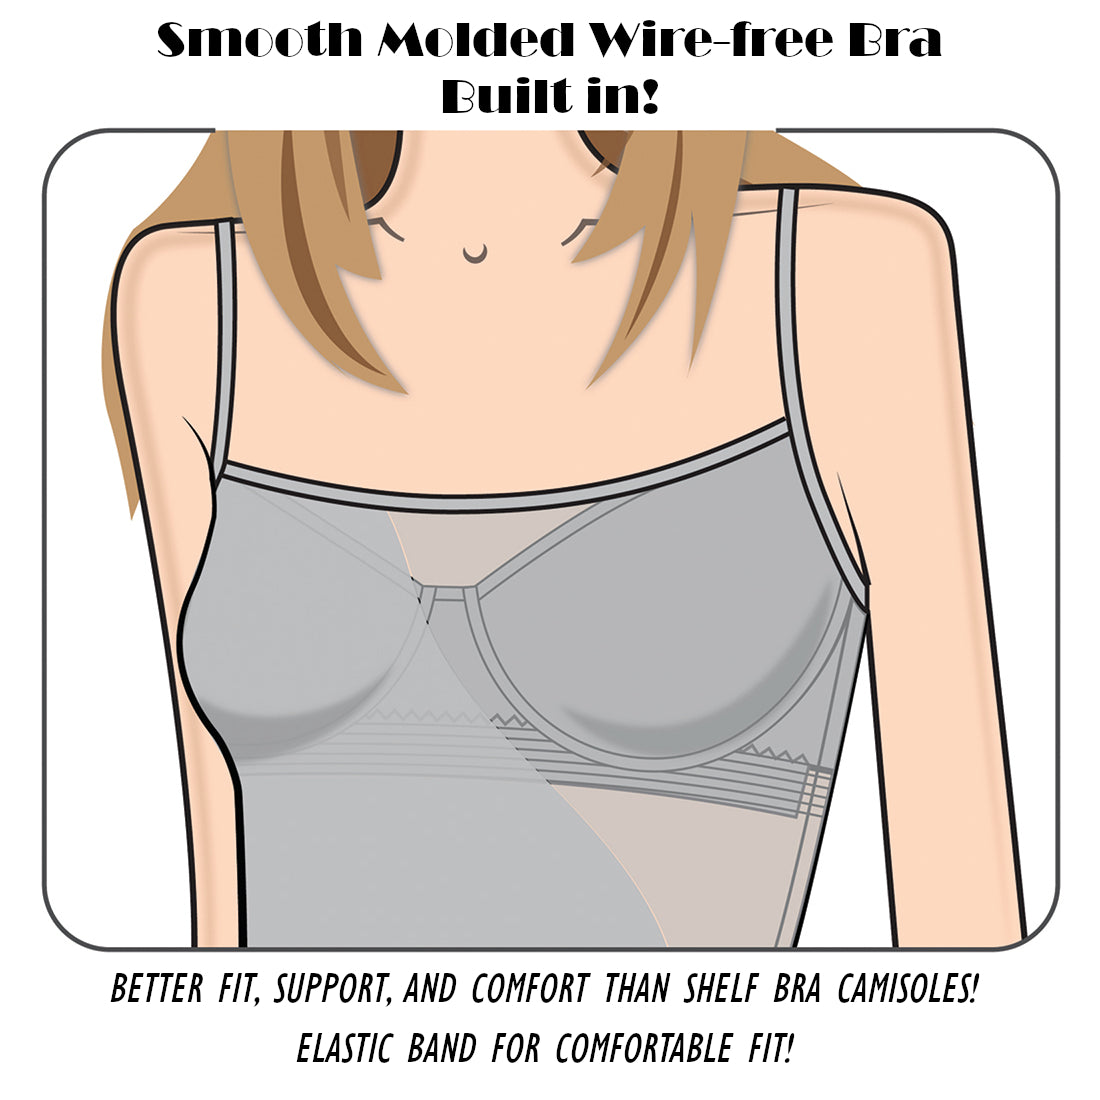 Hollywood Cami Tube Top Bra offers comfort and moderate support.